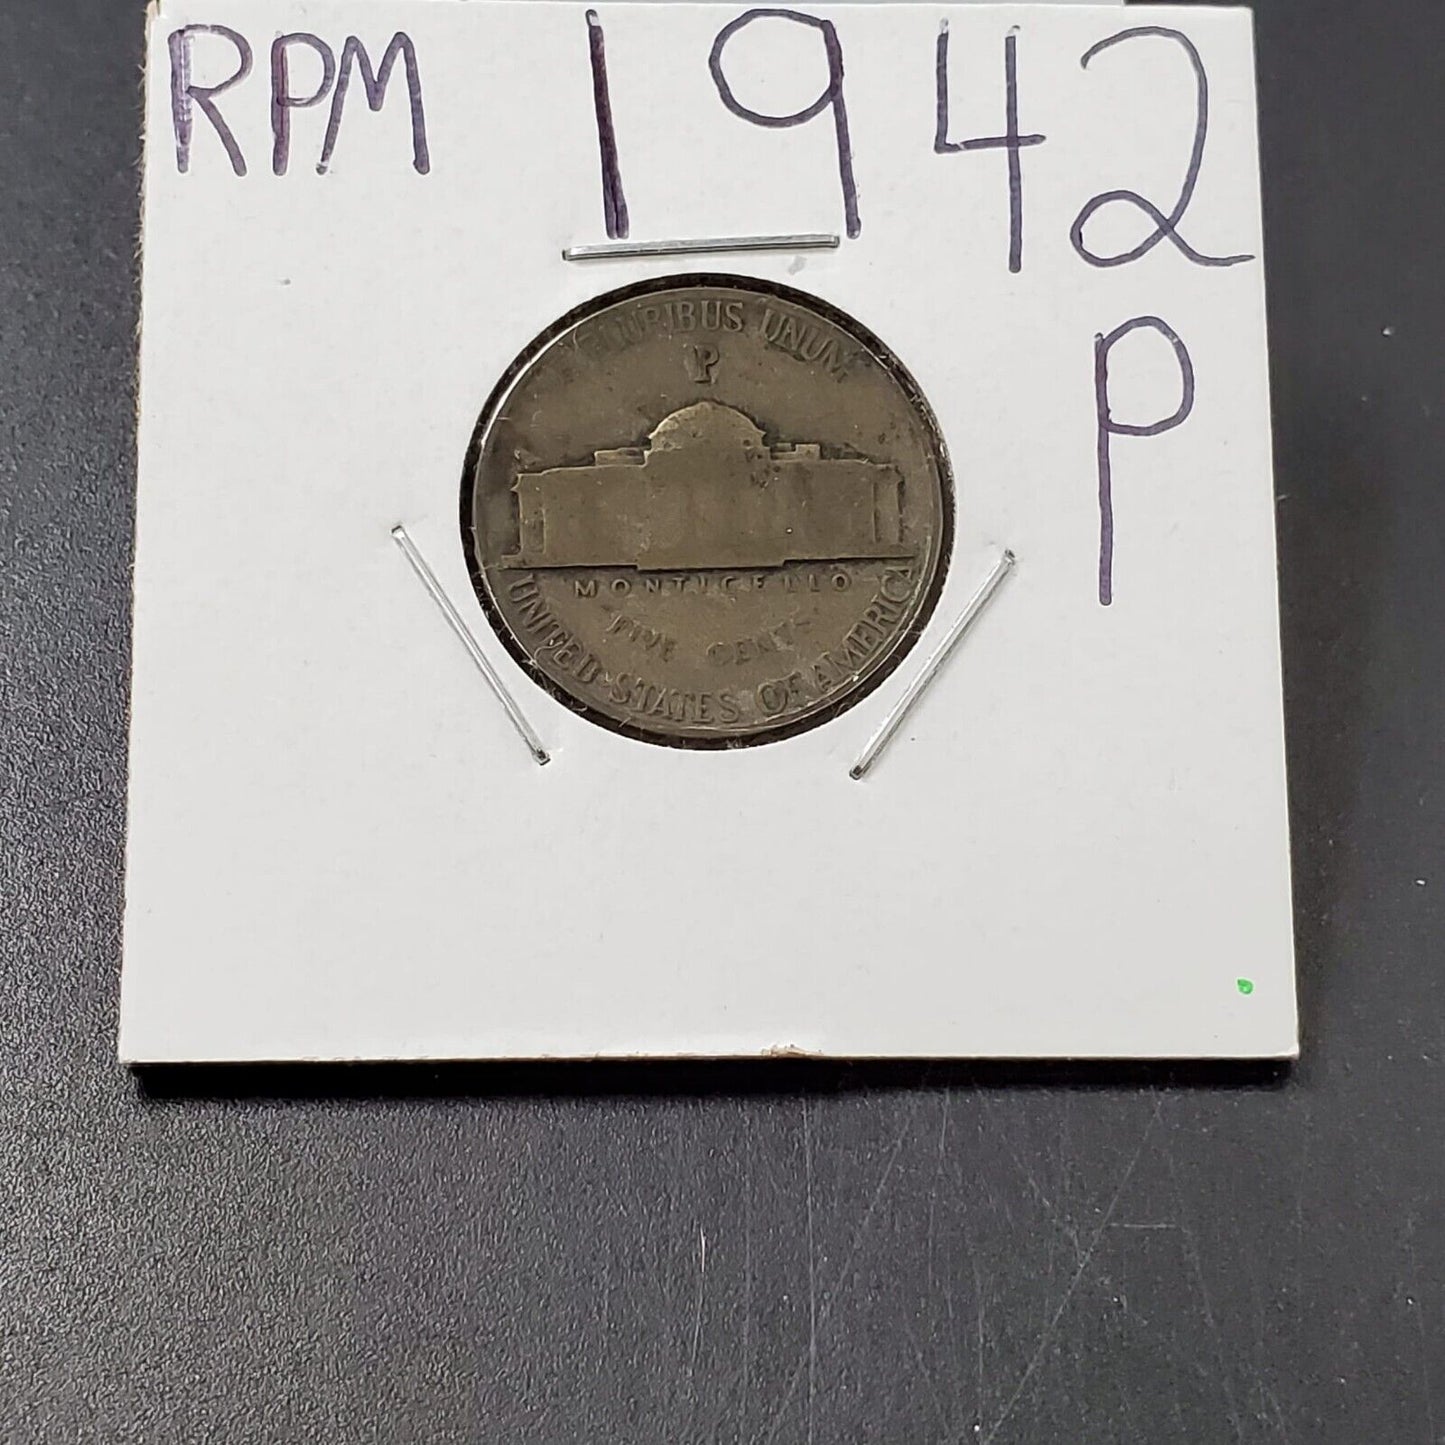 1942 P Jefferson Silver War Nickel Variety Coin RPM Circulated Condition